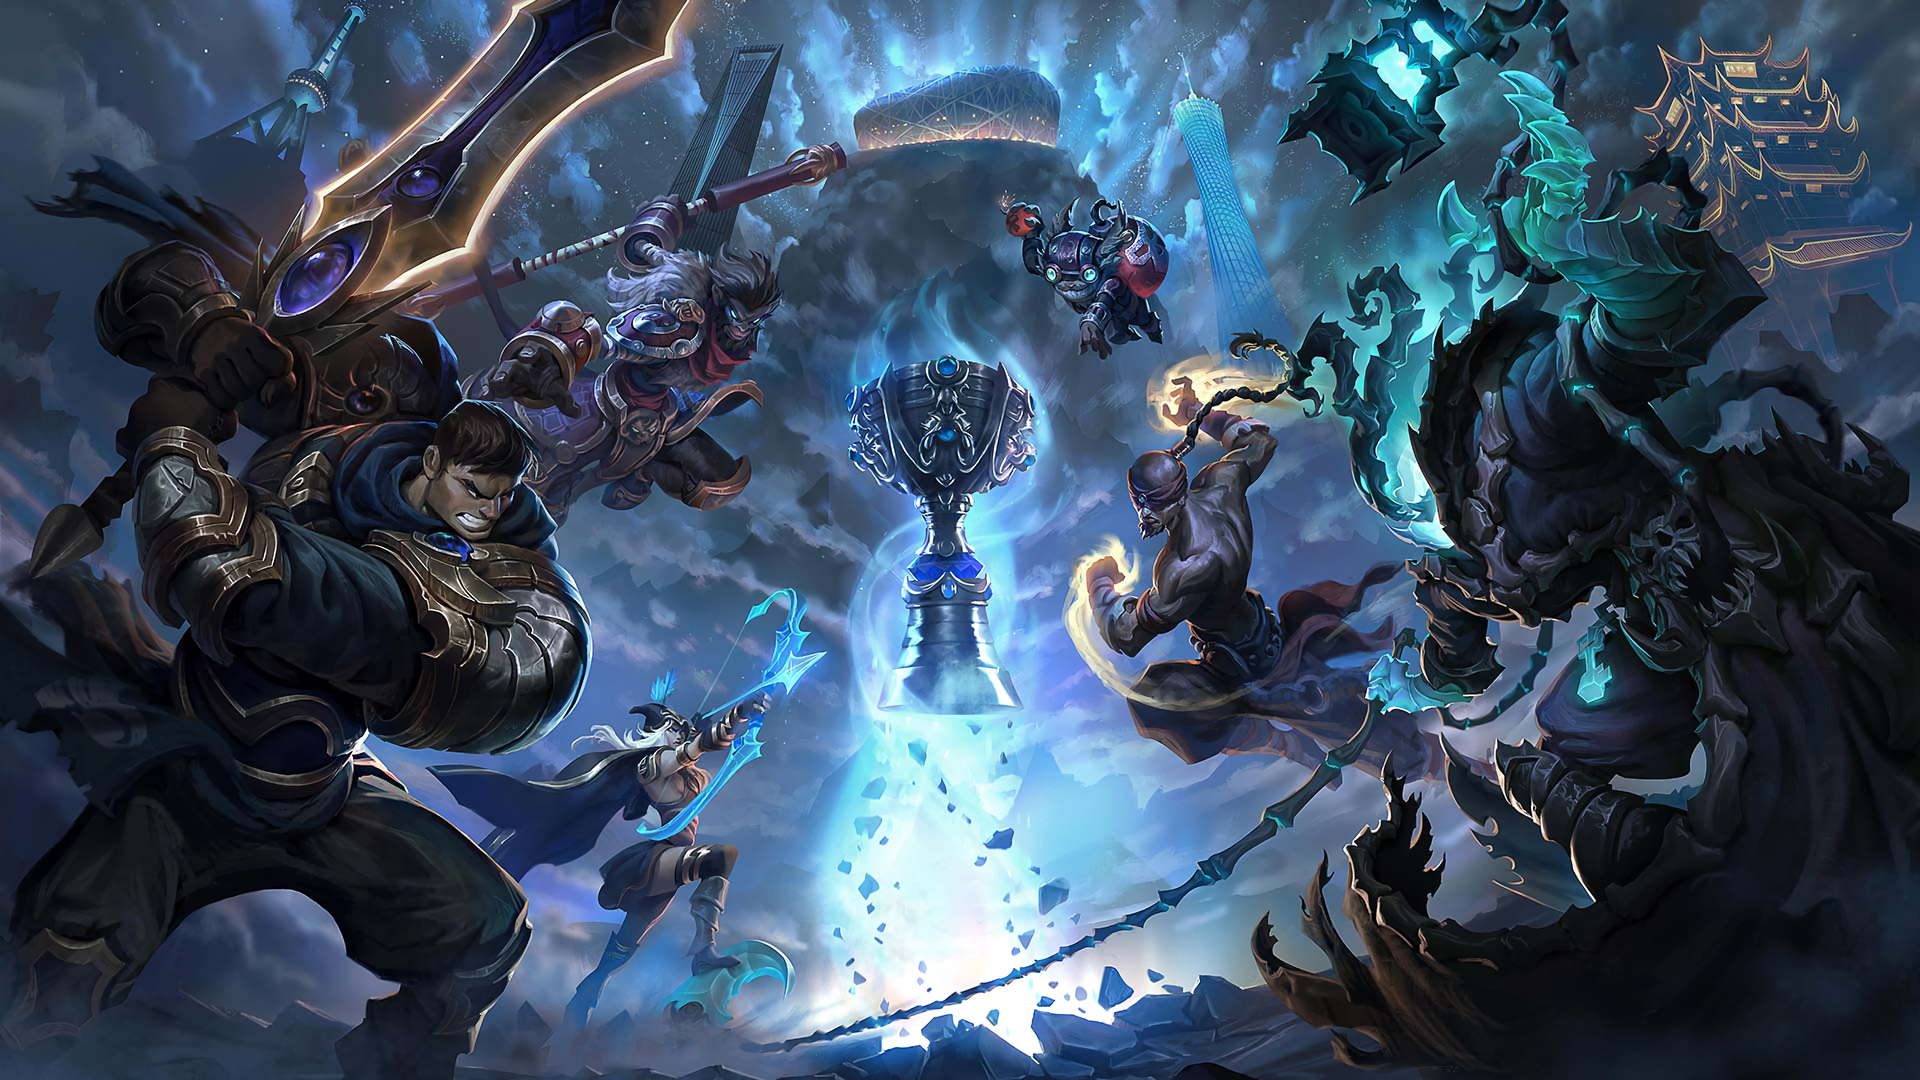 video game, league of legends, ashe (league of legends), garen (league of legends), lee sin (league of legends), thresh (league of legends), wukong (league of legends), ziggs (league of legends)